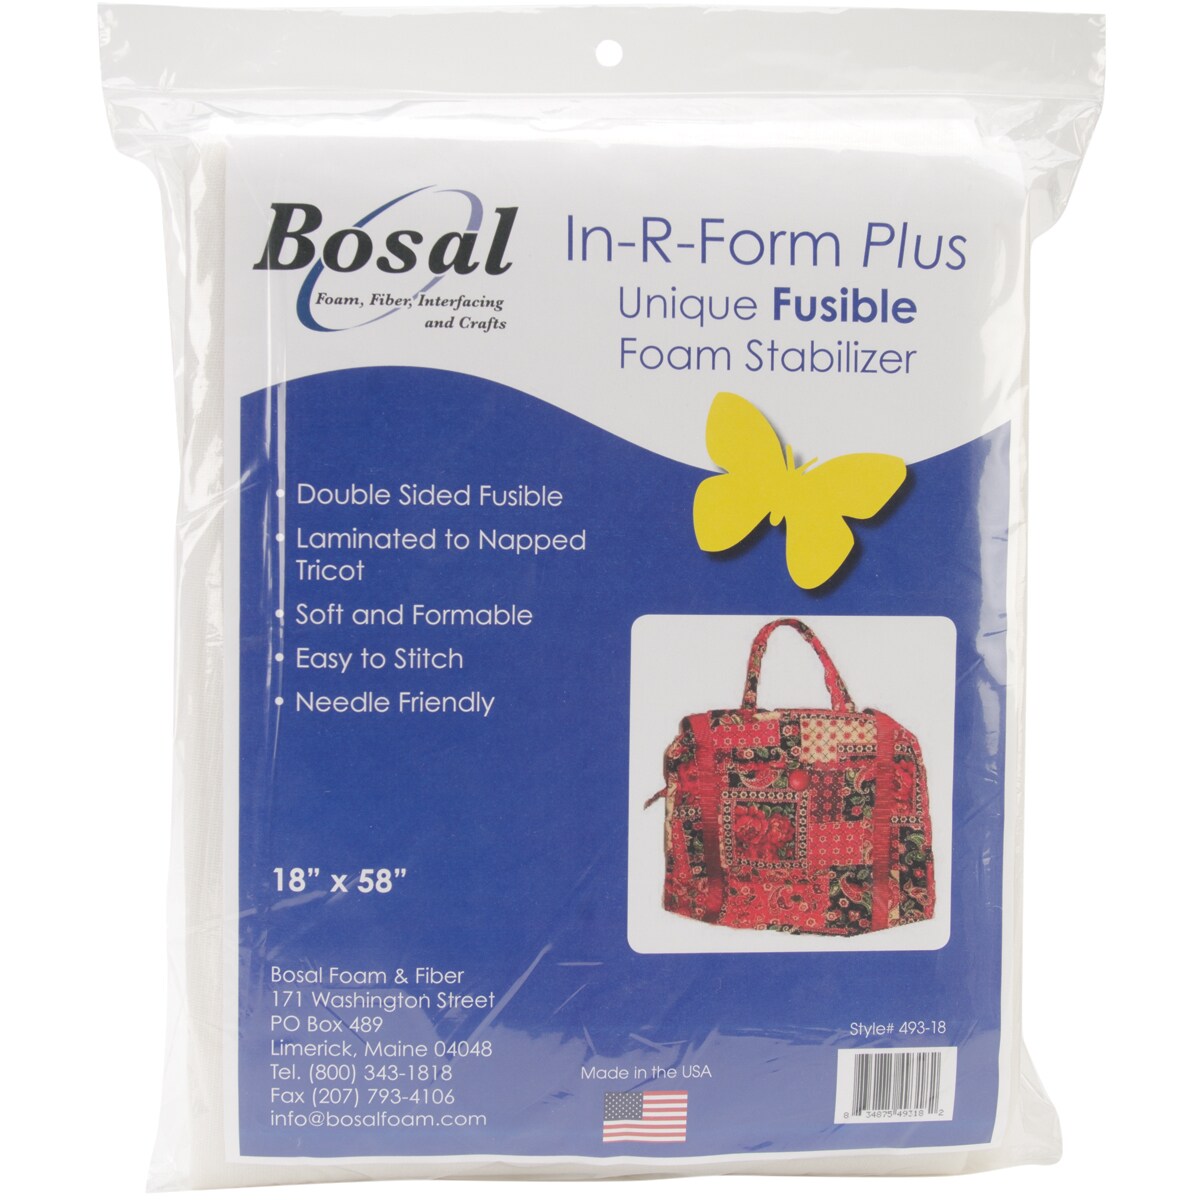 Bosal 493-18 In-R-Form Double Sided Fusible Foam Stabilizer, 18X58-Inch - image 2 of 2